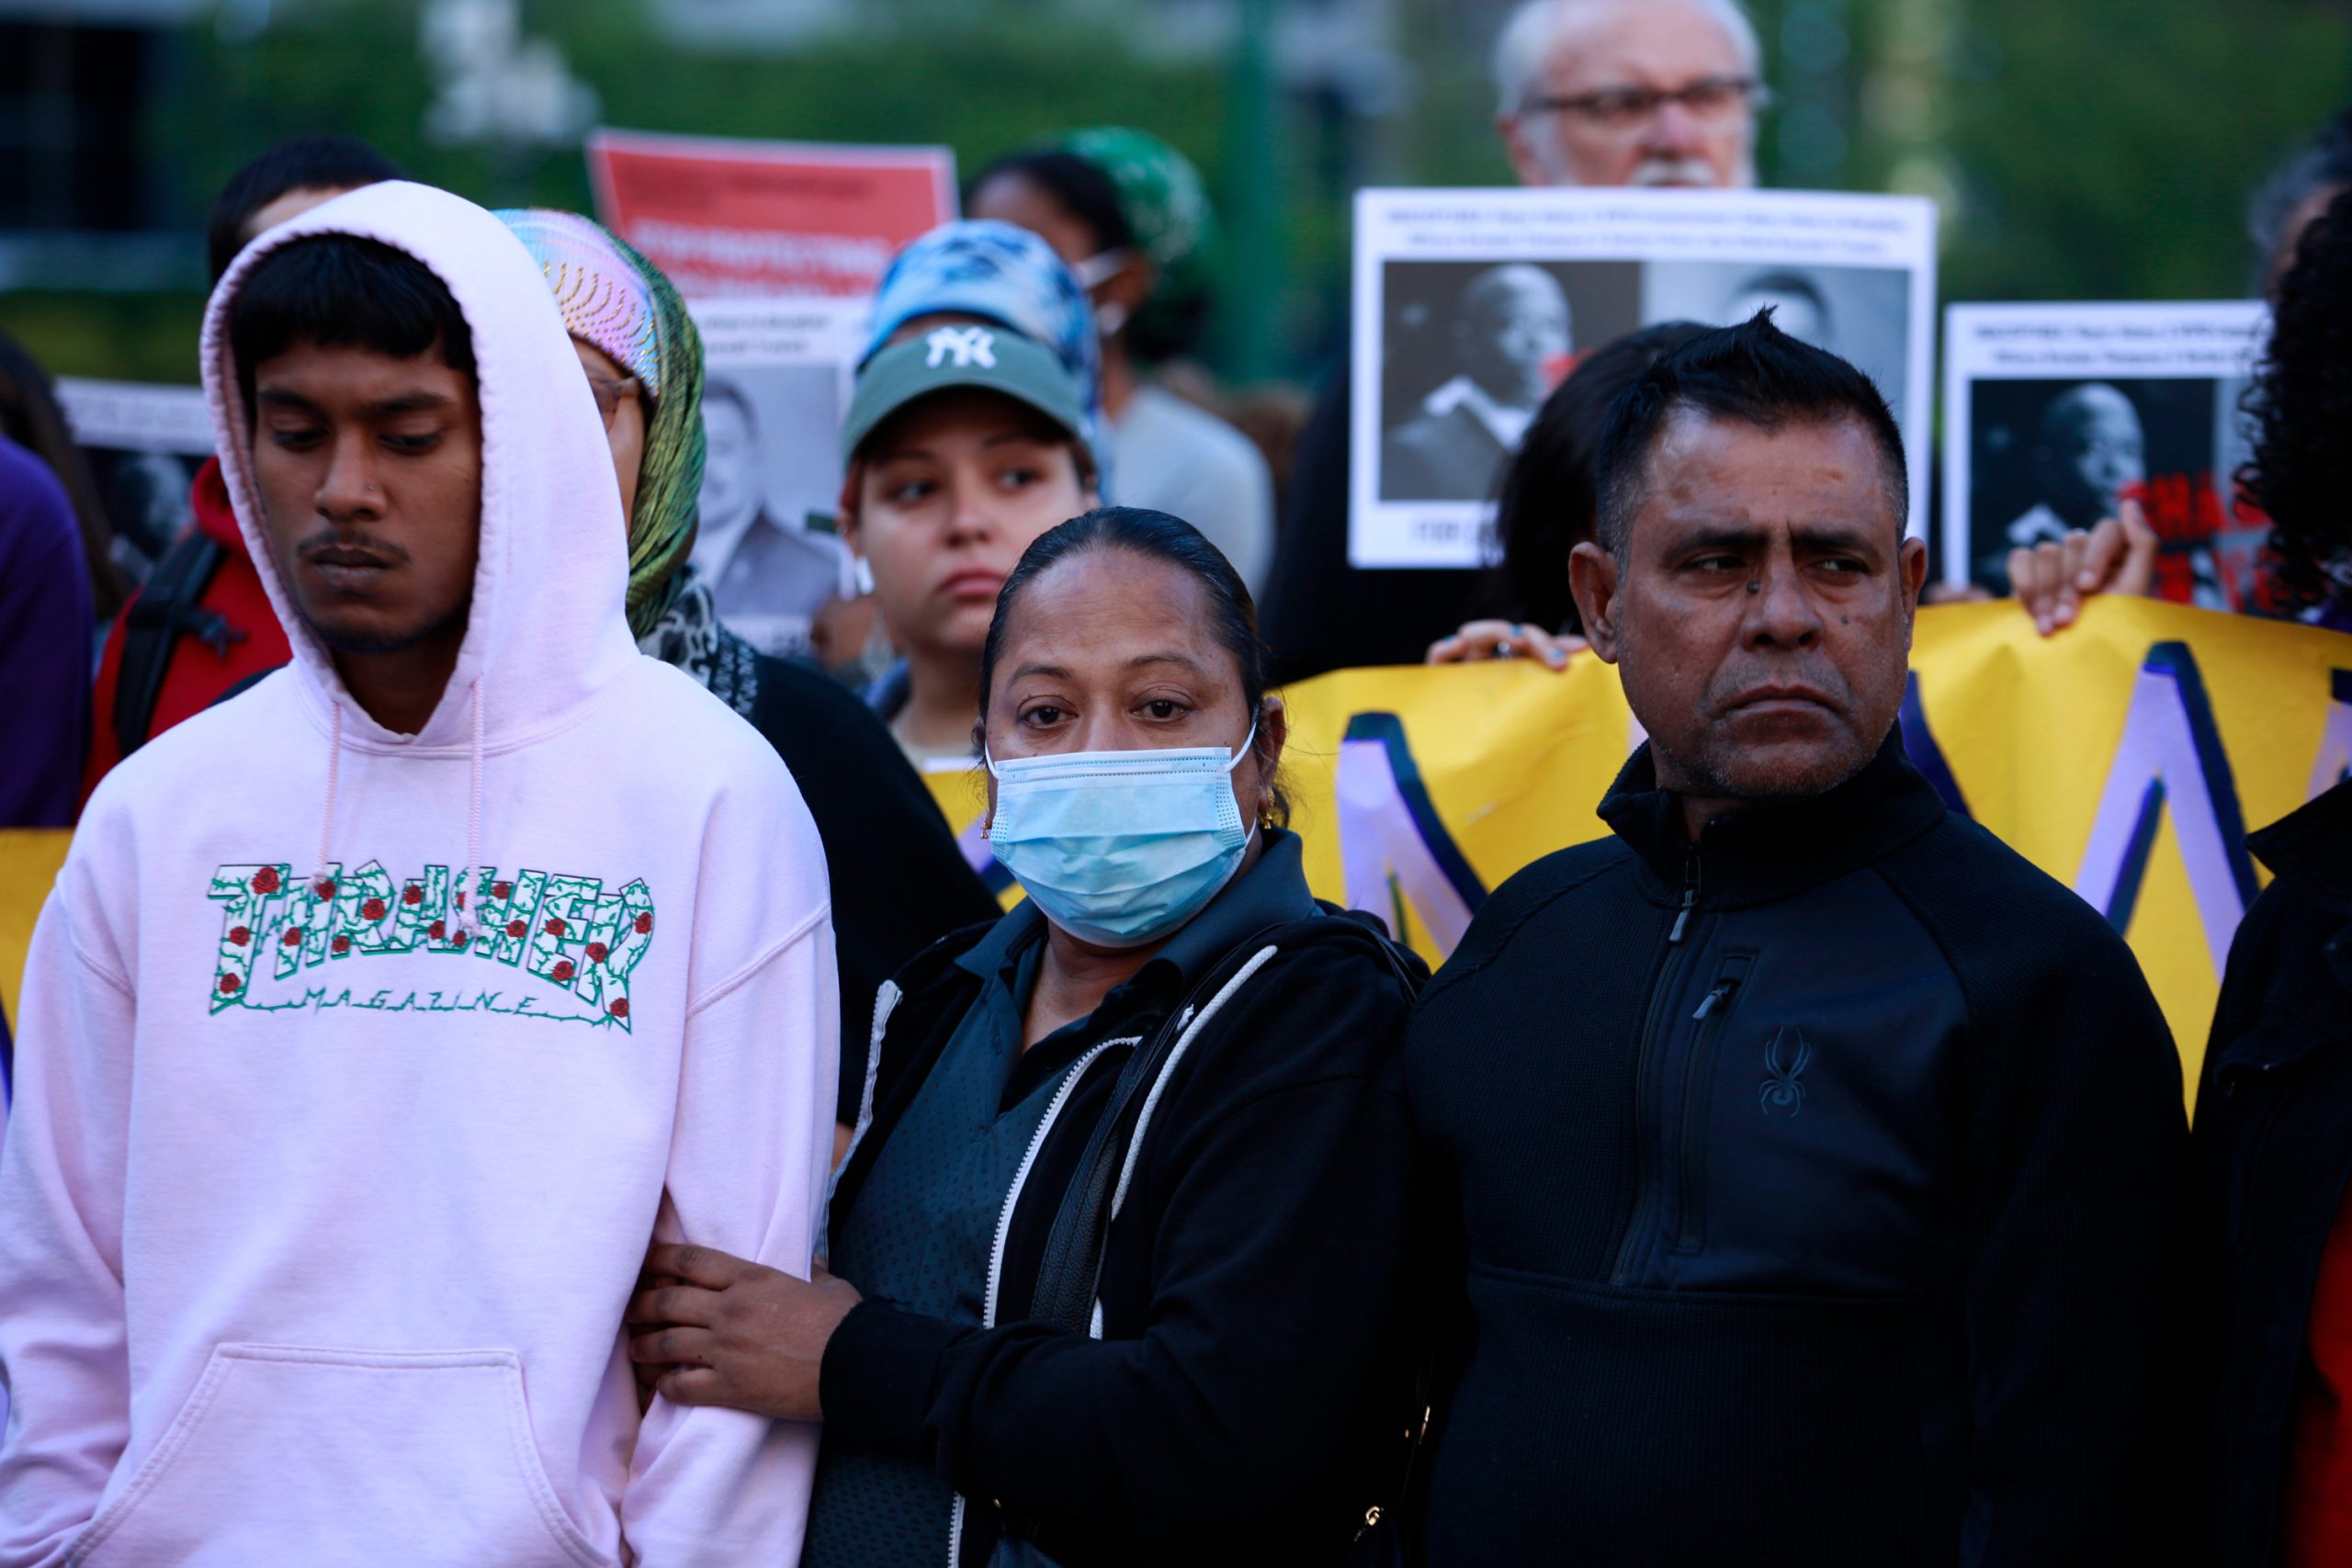 The family of Win Rozario, including his brother, Utsho Rozario, left, attend a rally for Kawaski Trawick after Win was also killed by NYPD officers.